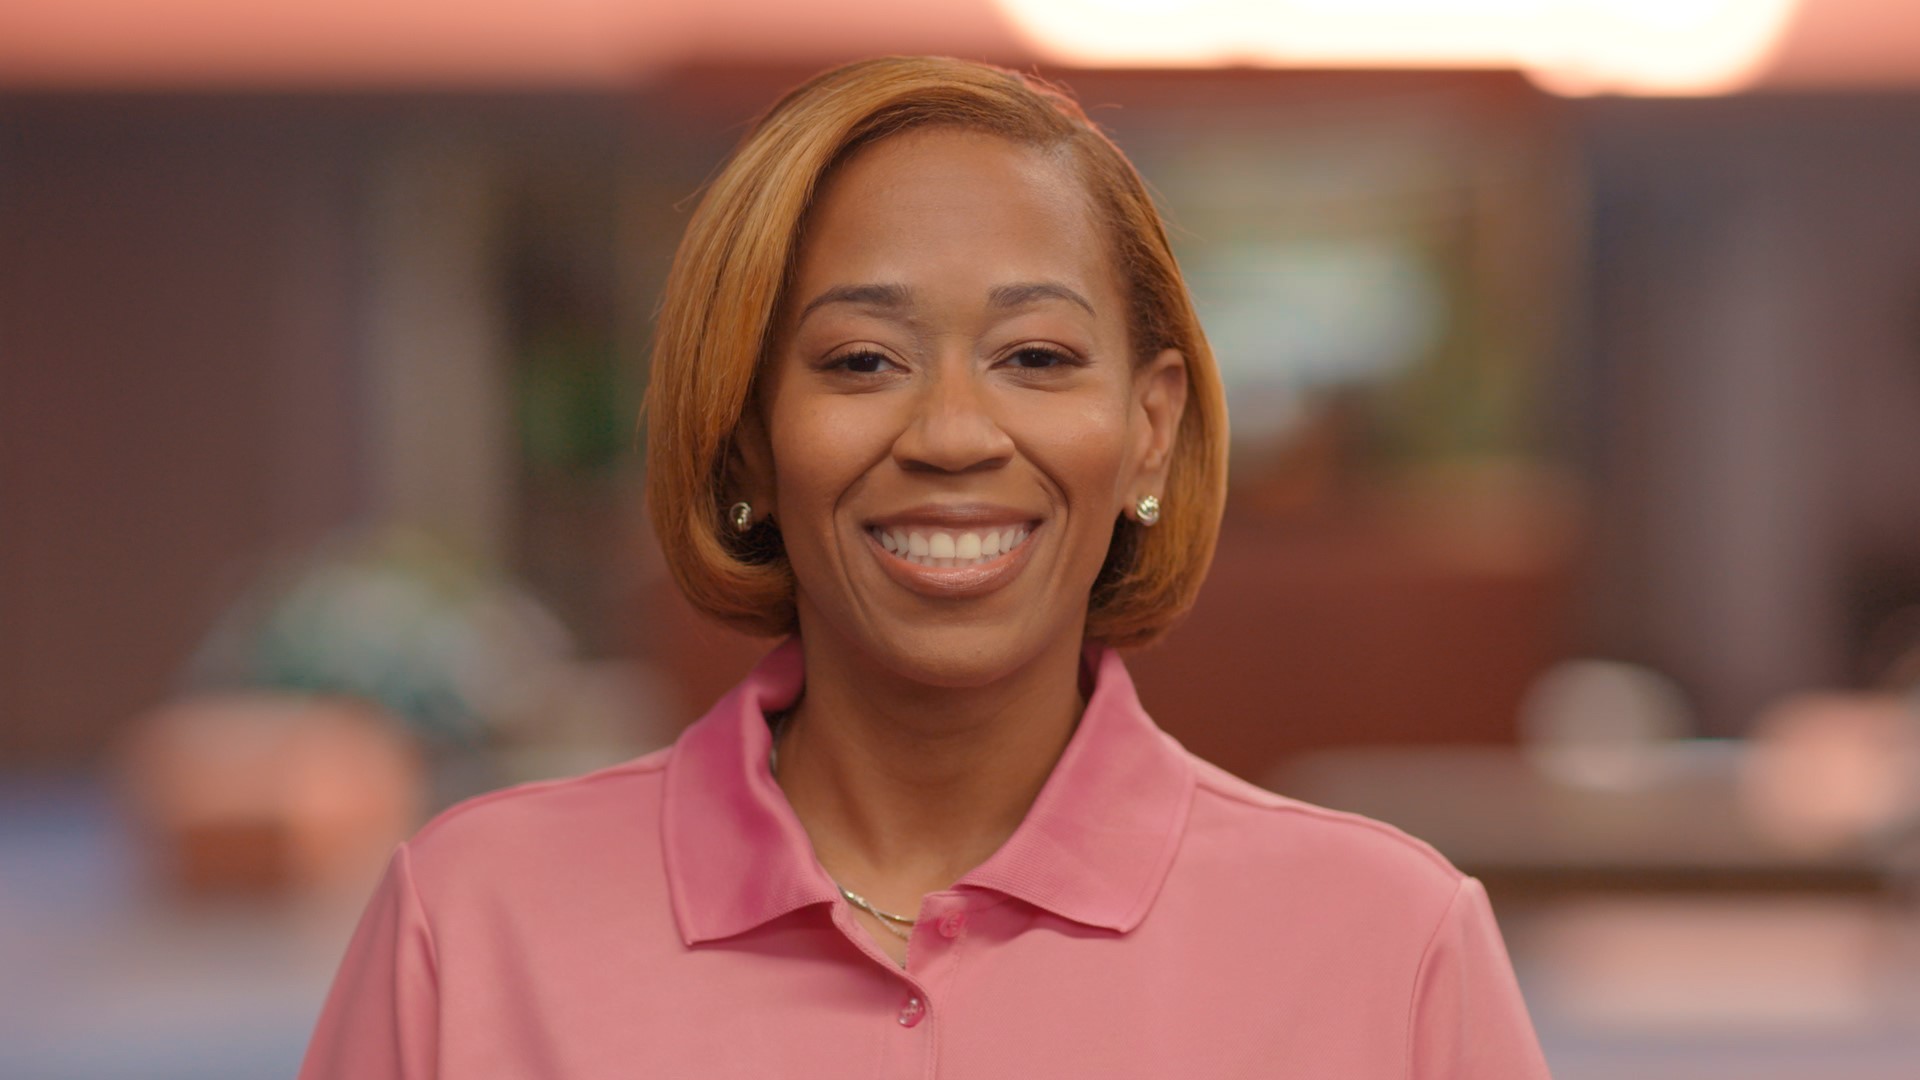 Shekina Wiley-Sattiewhite has a passion to help young parents thrive.